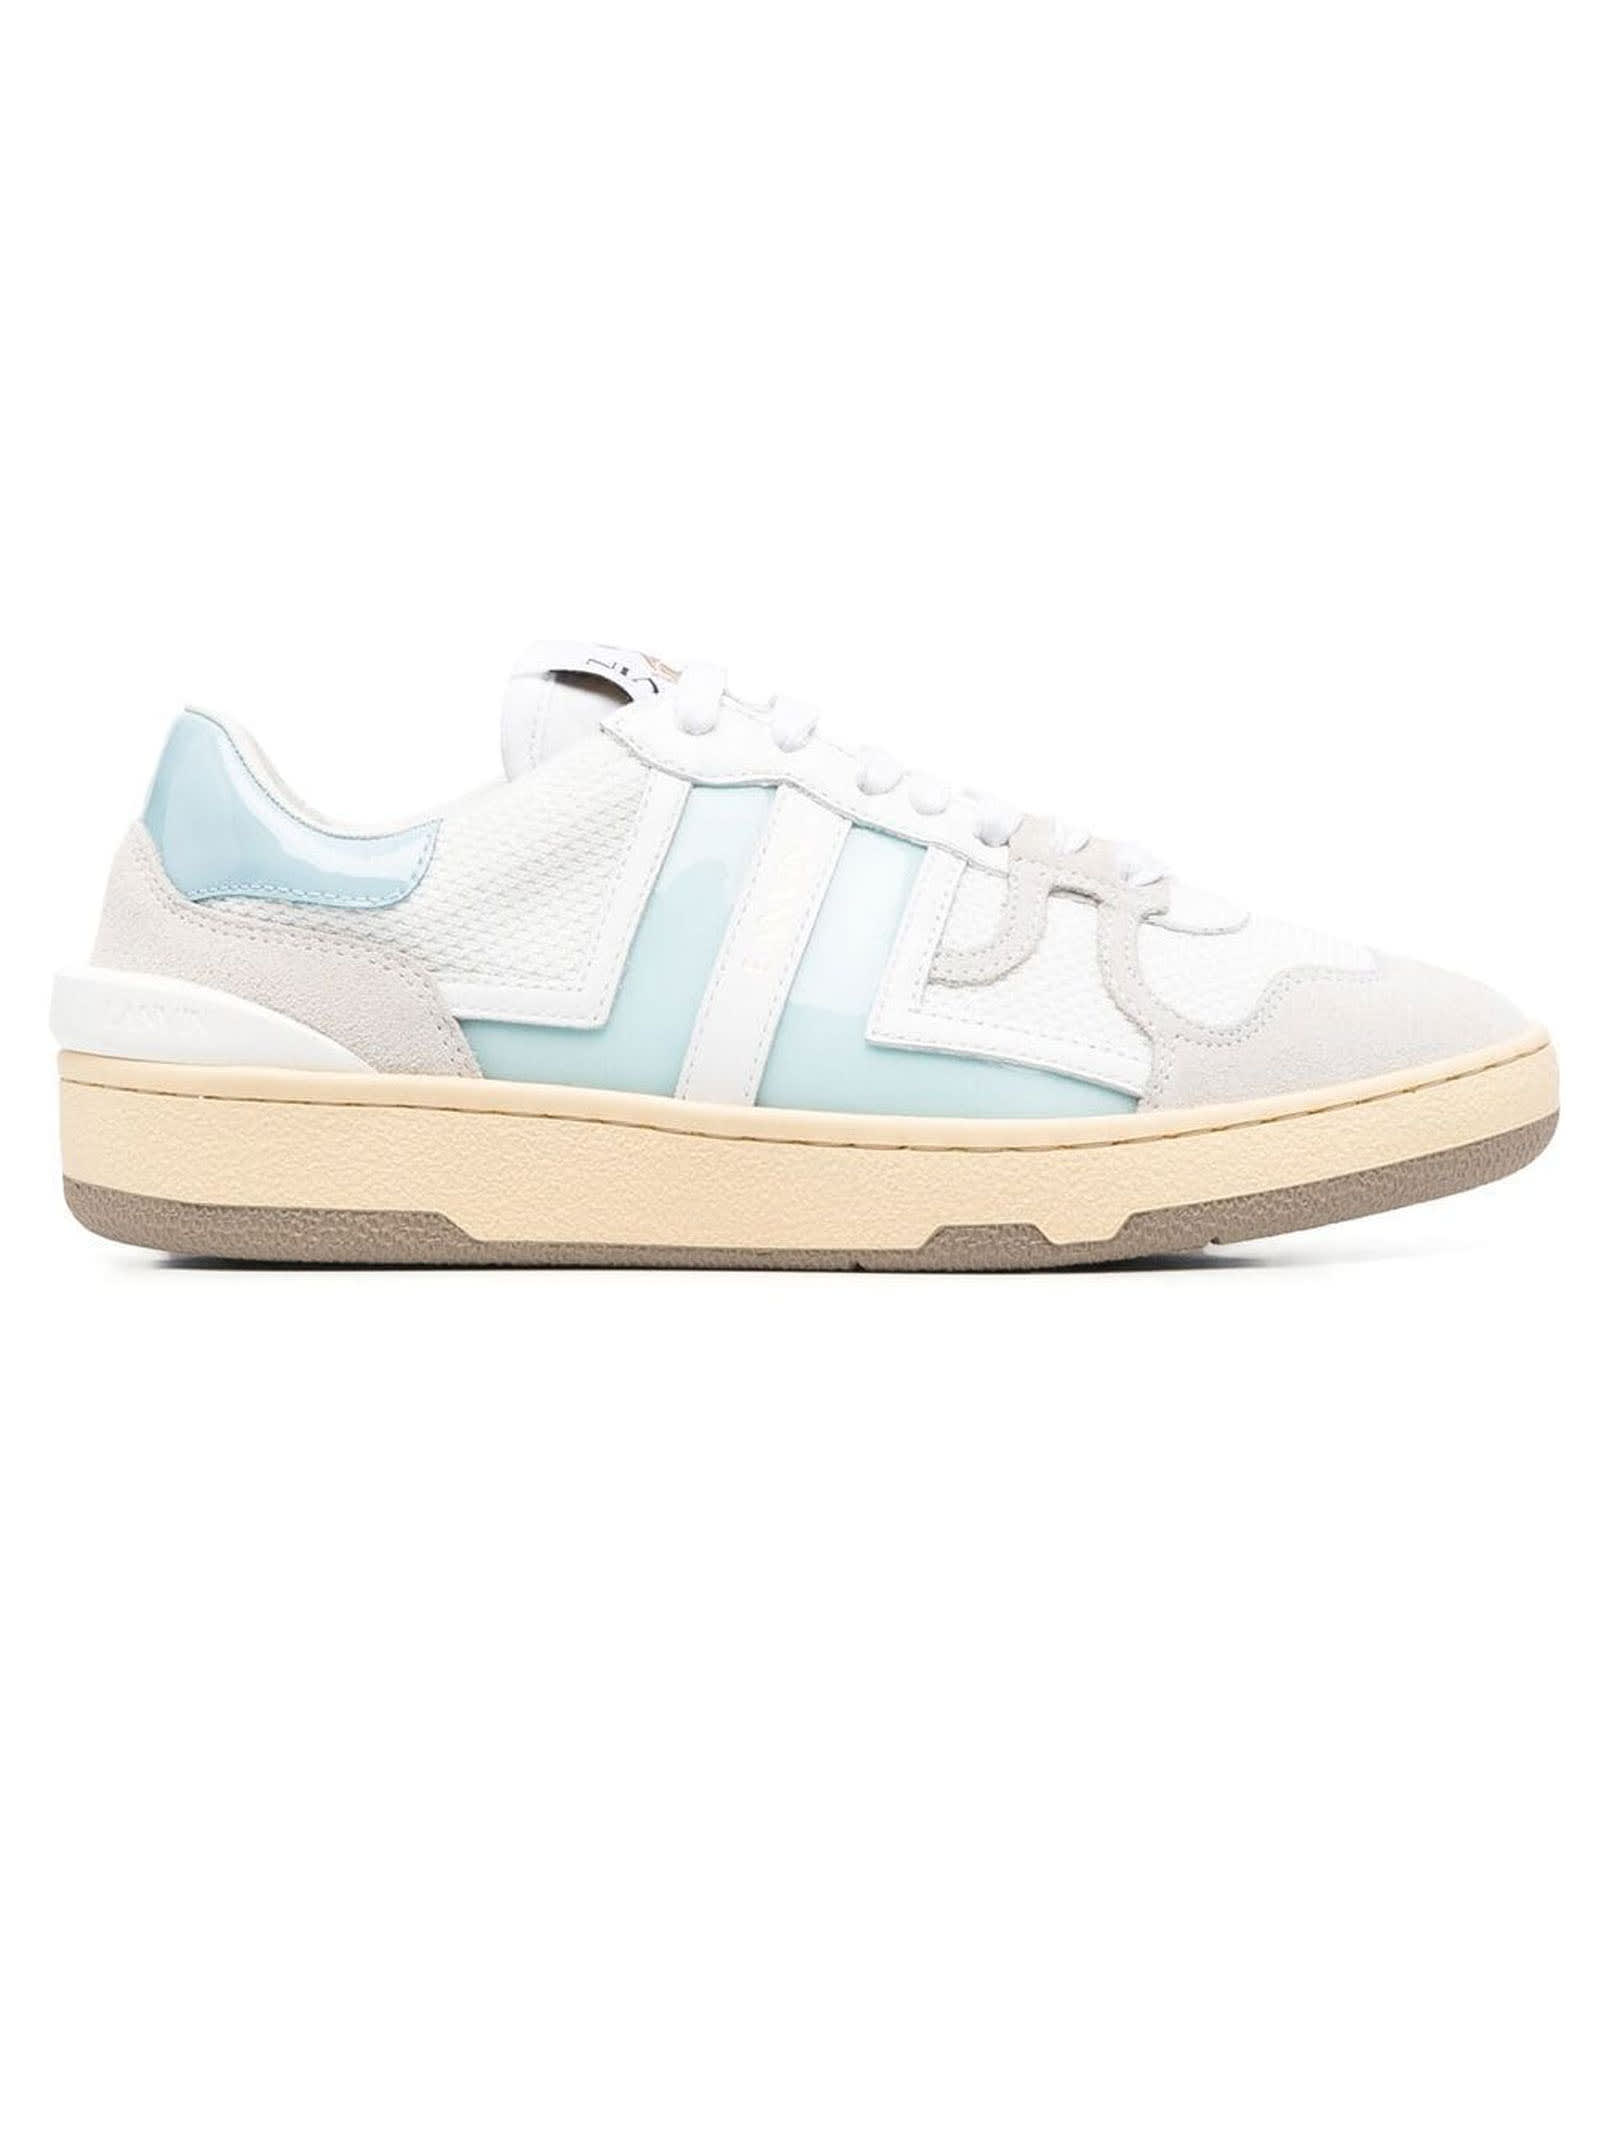 Lanvin White Calf Leather Clay Sneakers